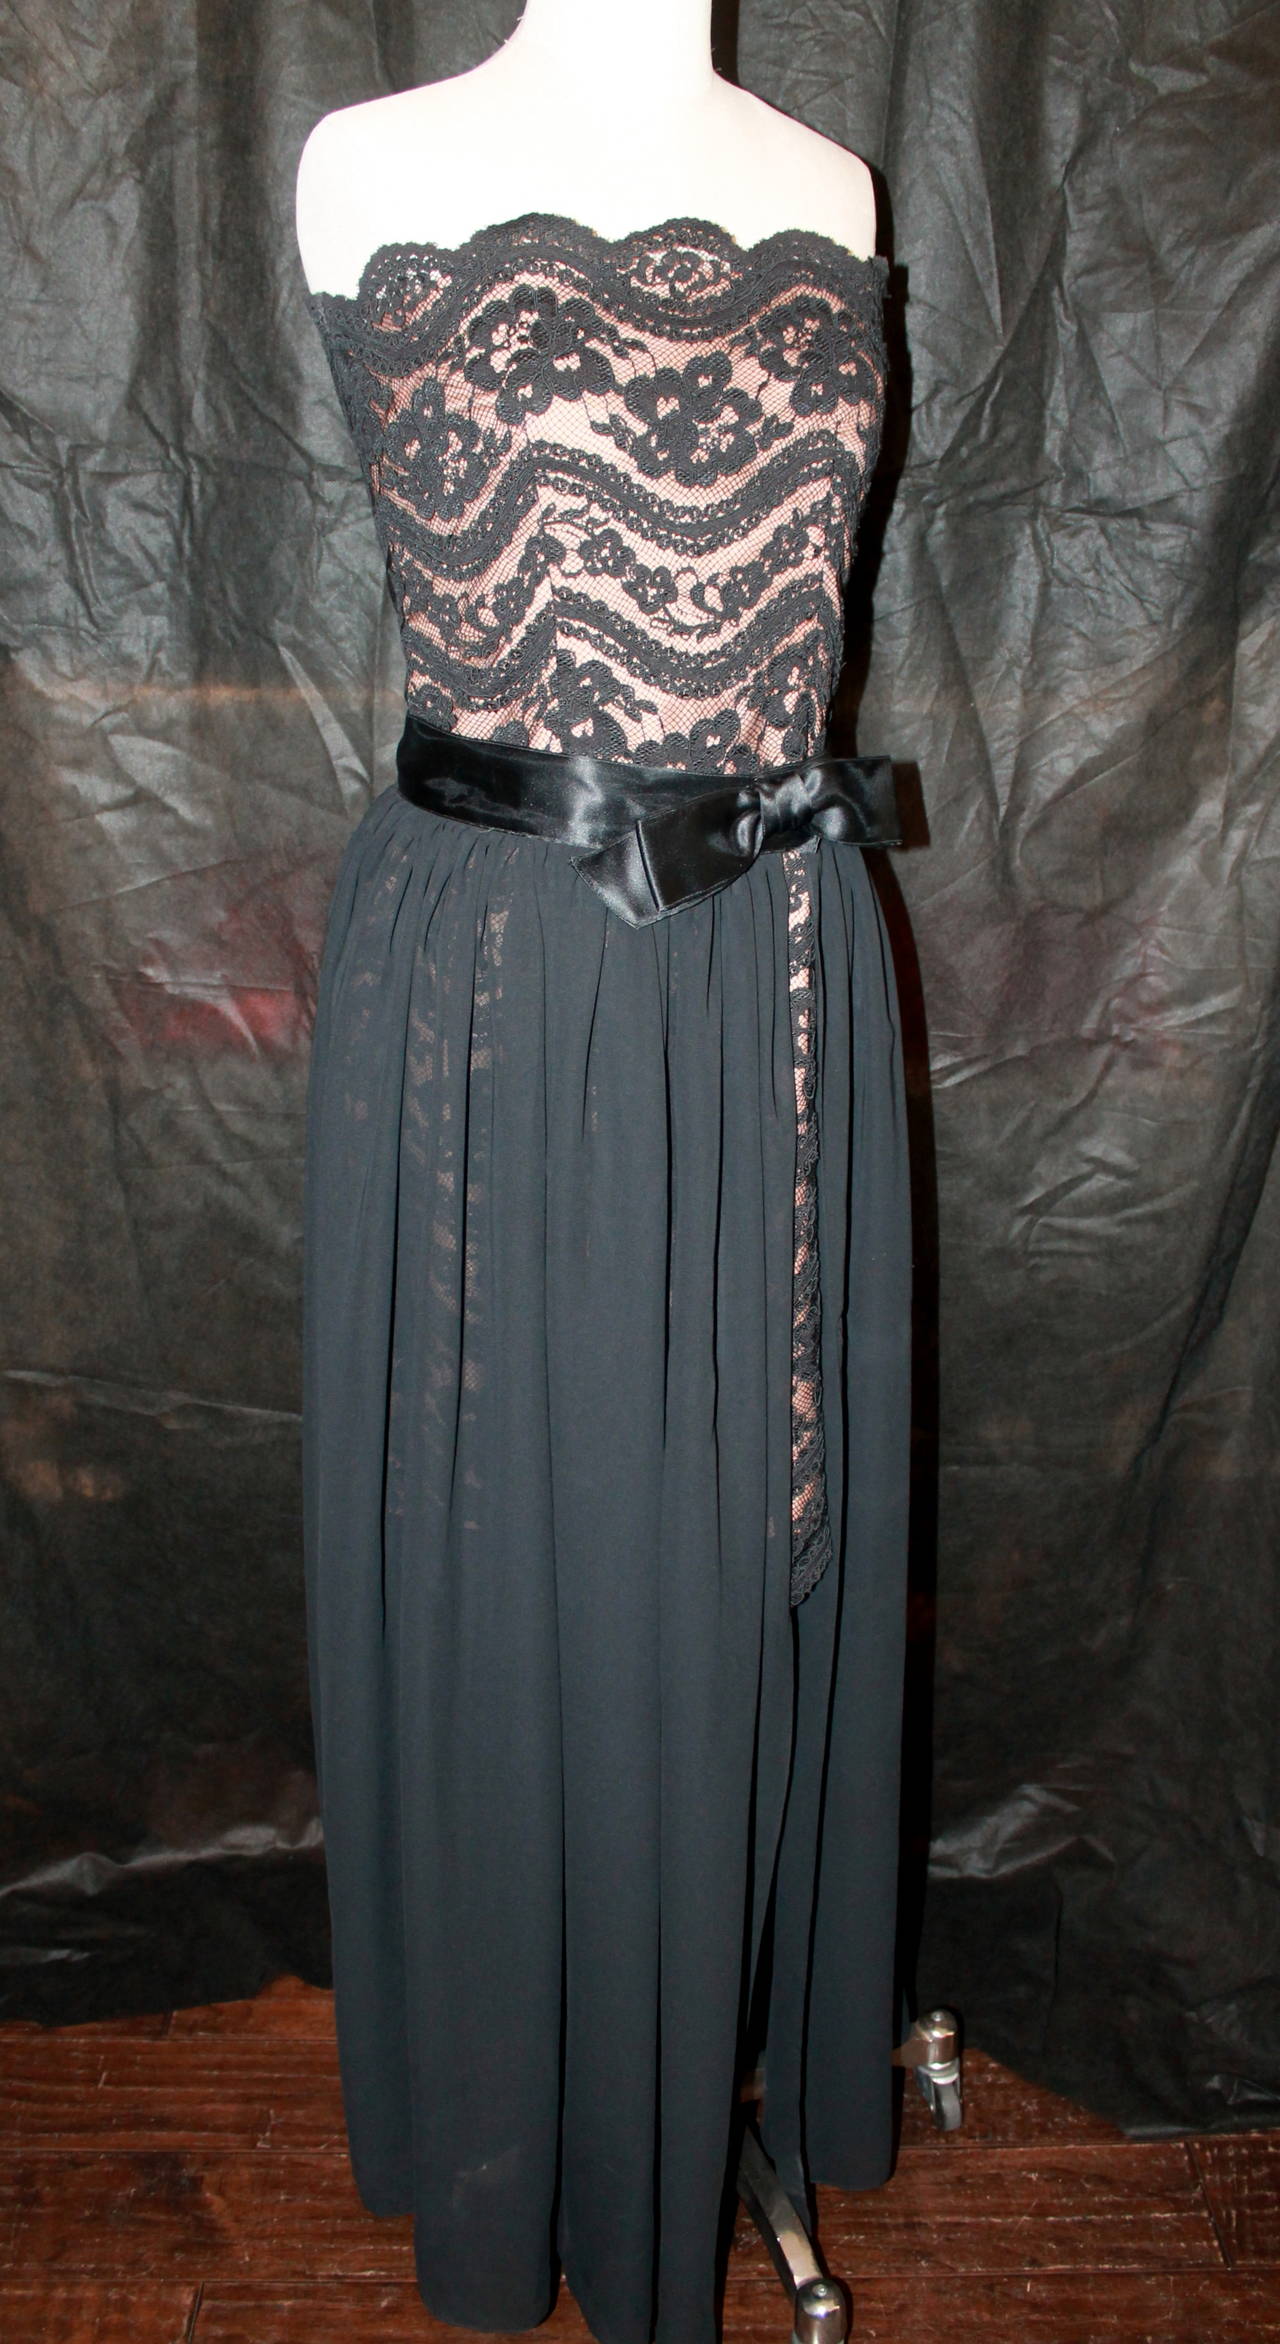 Scaasi Vintage 1980's Strapless Tan & Black Lace Dress & Overlay - 6. These piece are in excellent vintage condition.

Measurements:

Dress
Bust- 31